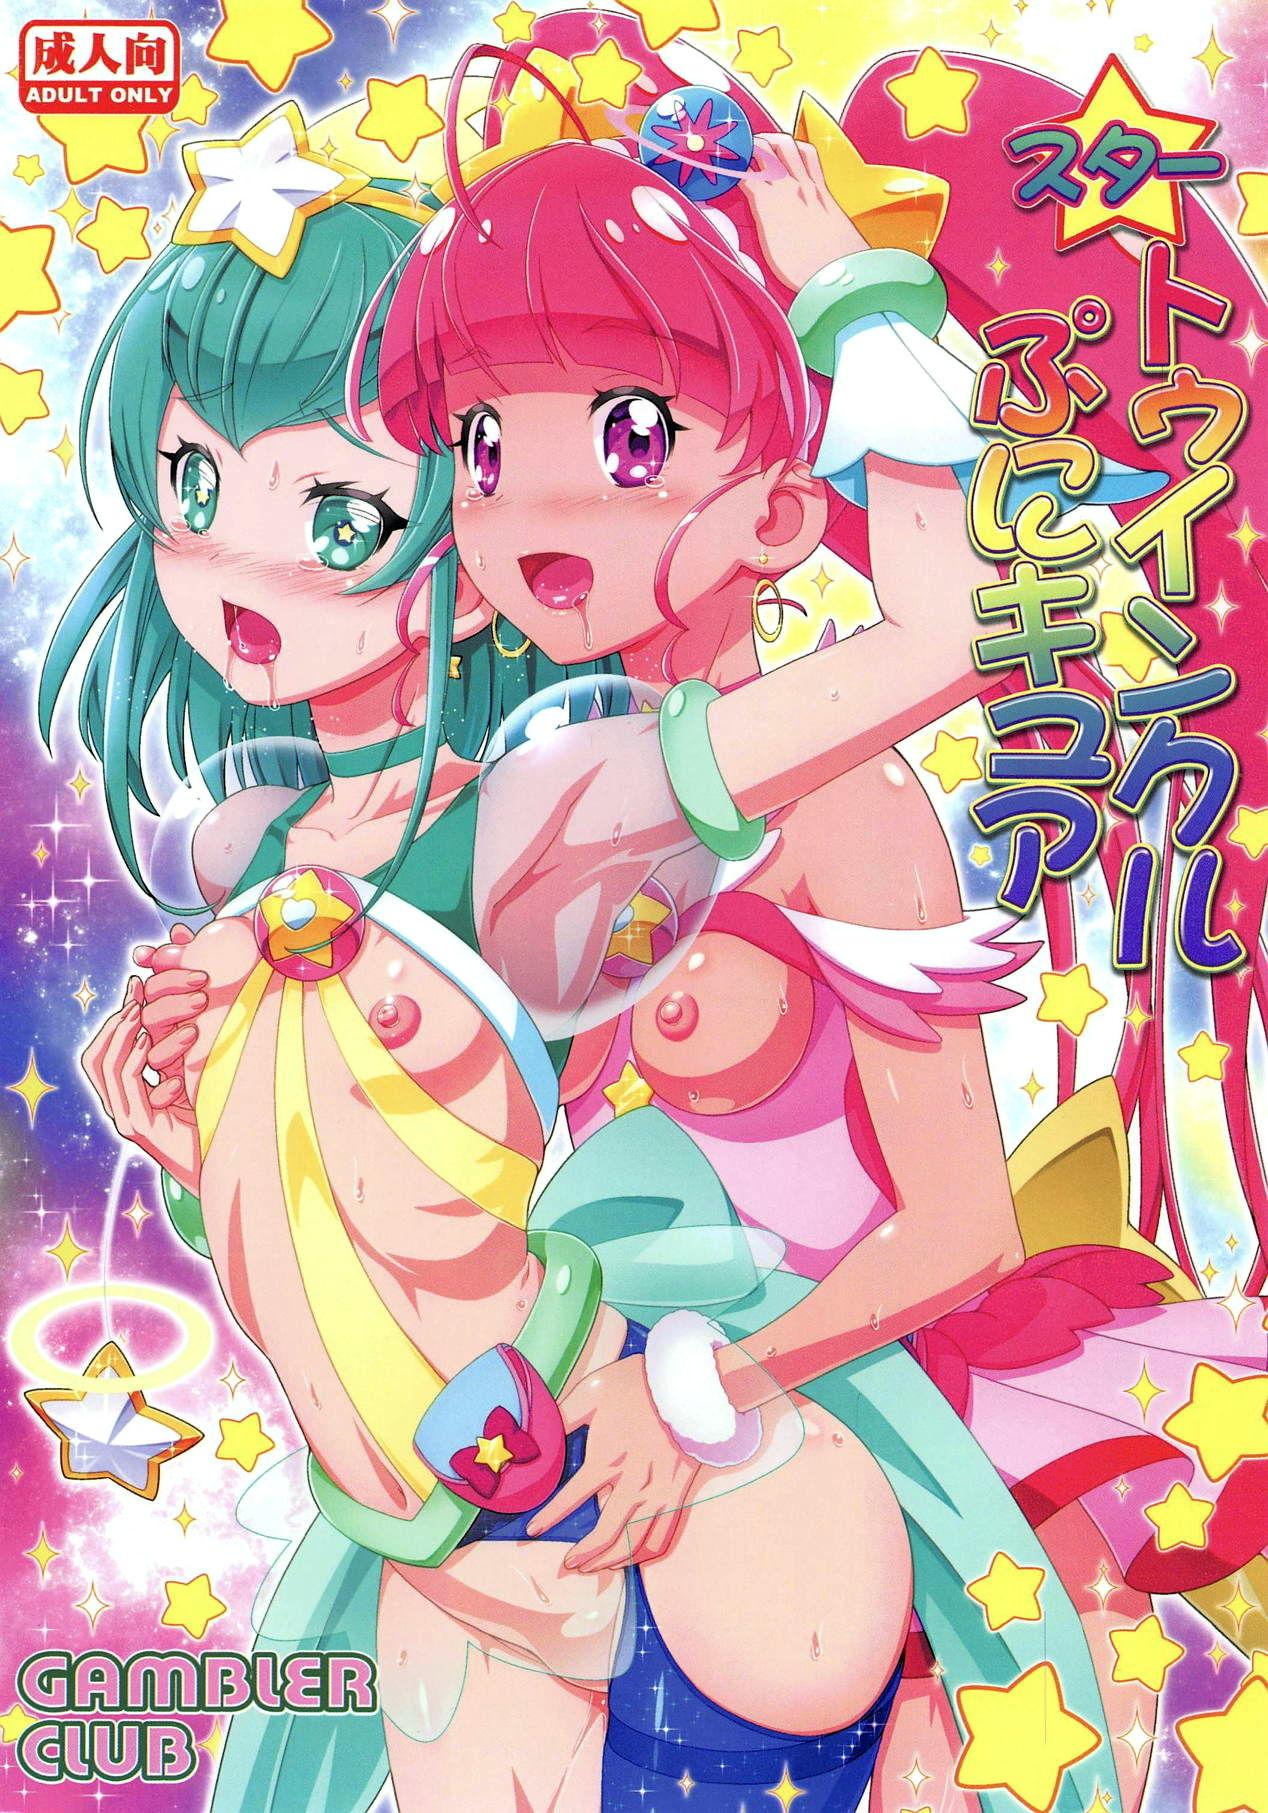 Belly Star Twinkle PuniCure - Star twinkle precure Free Blowjobs - Picture 1